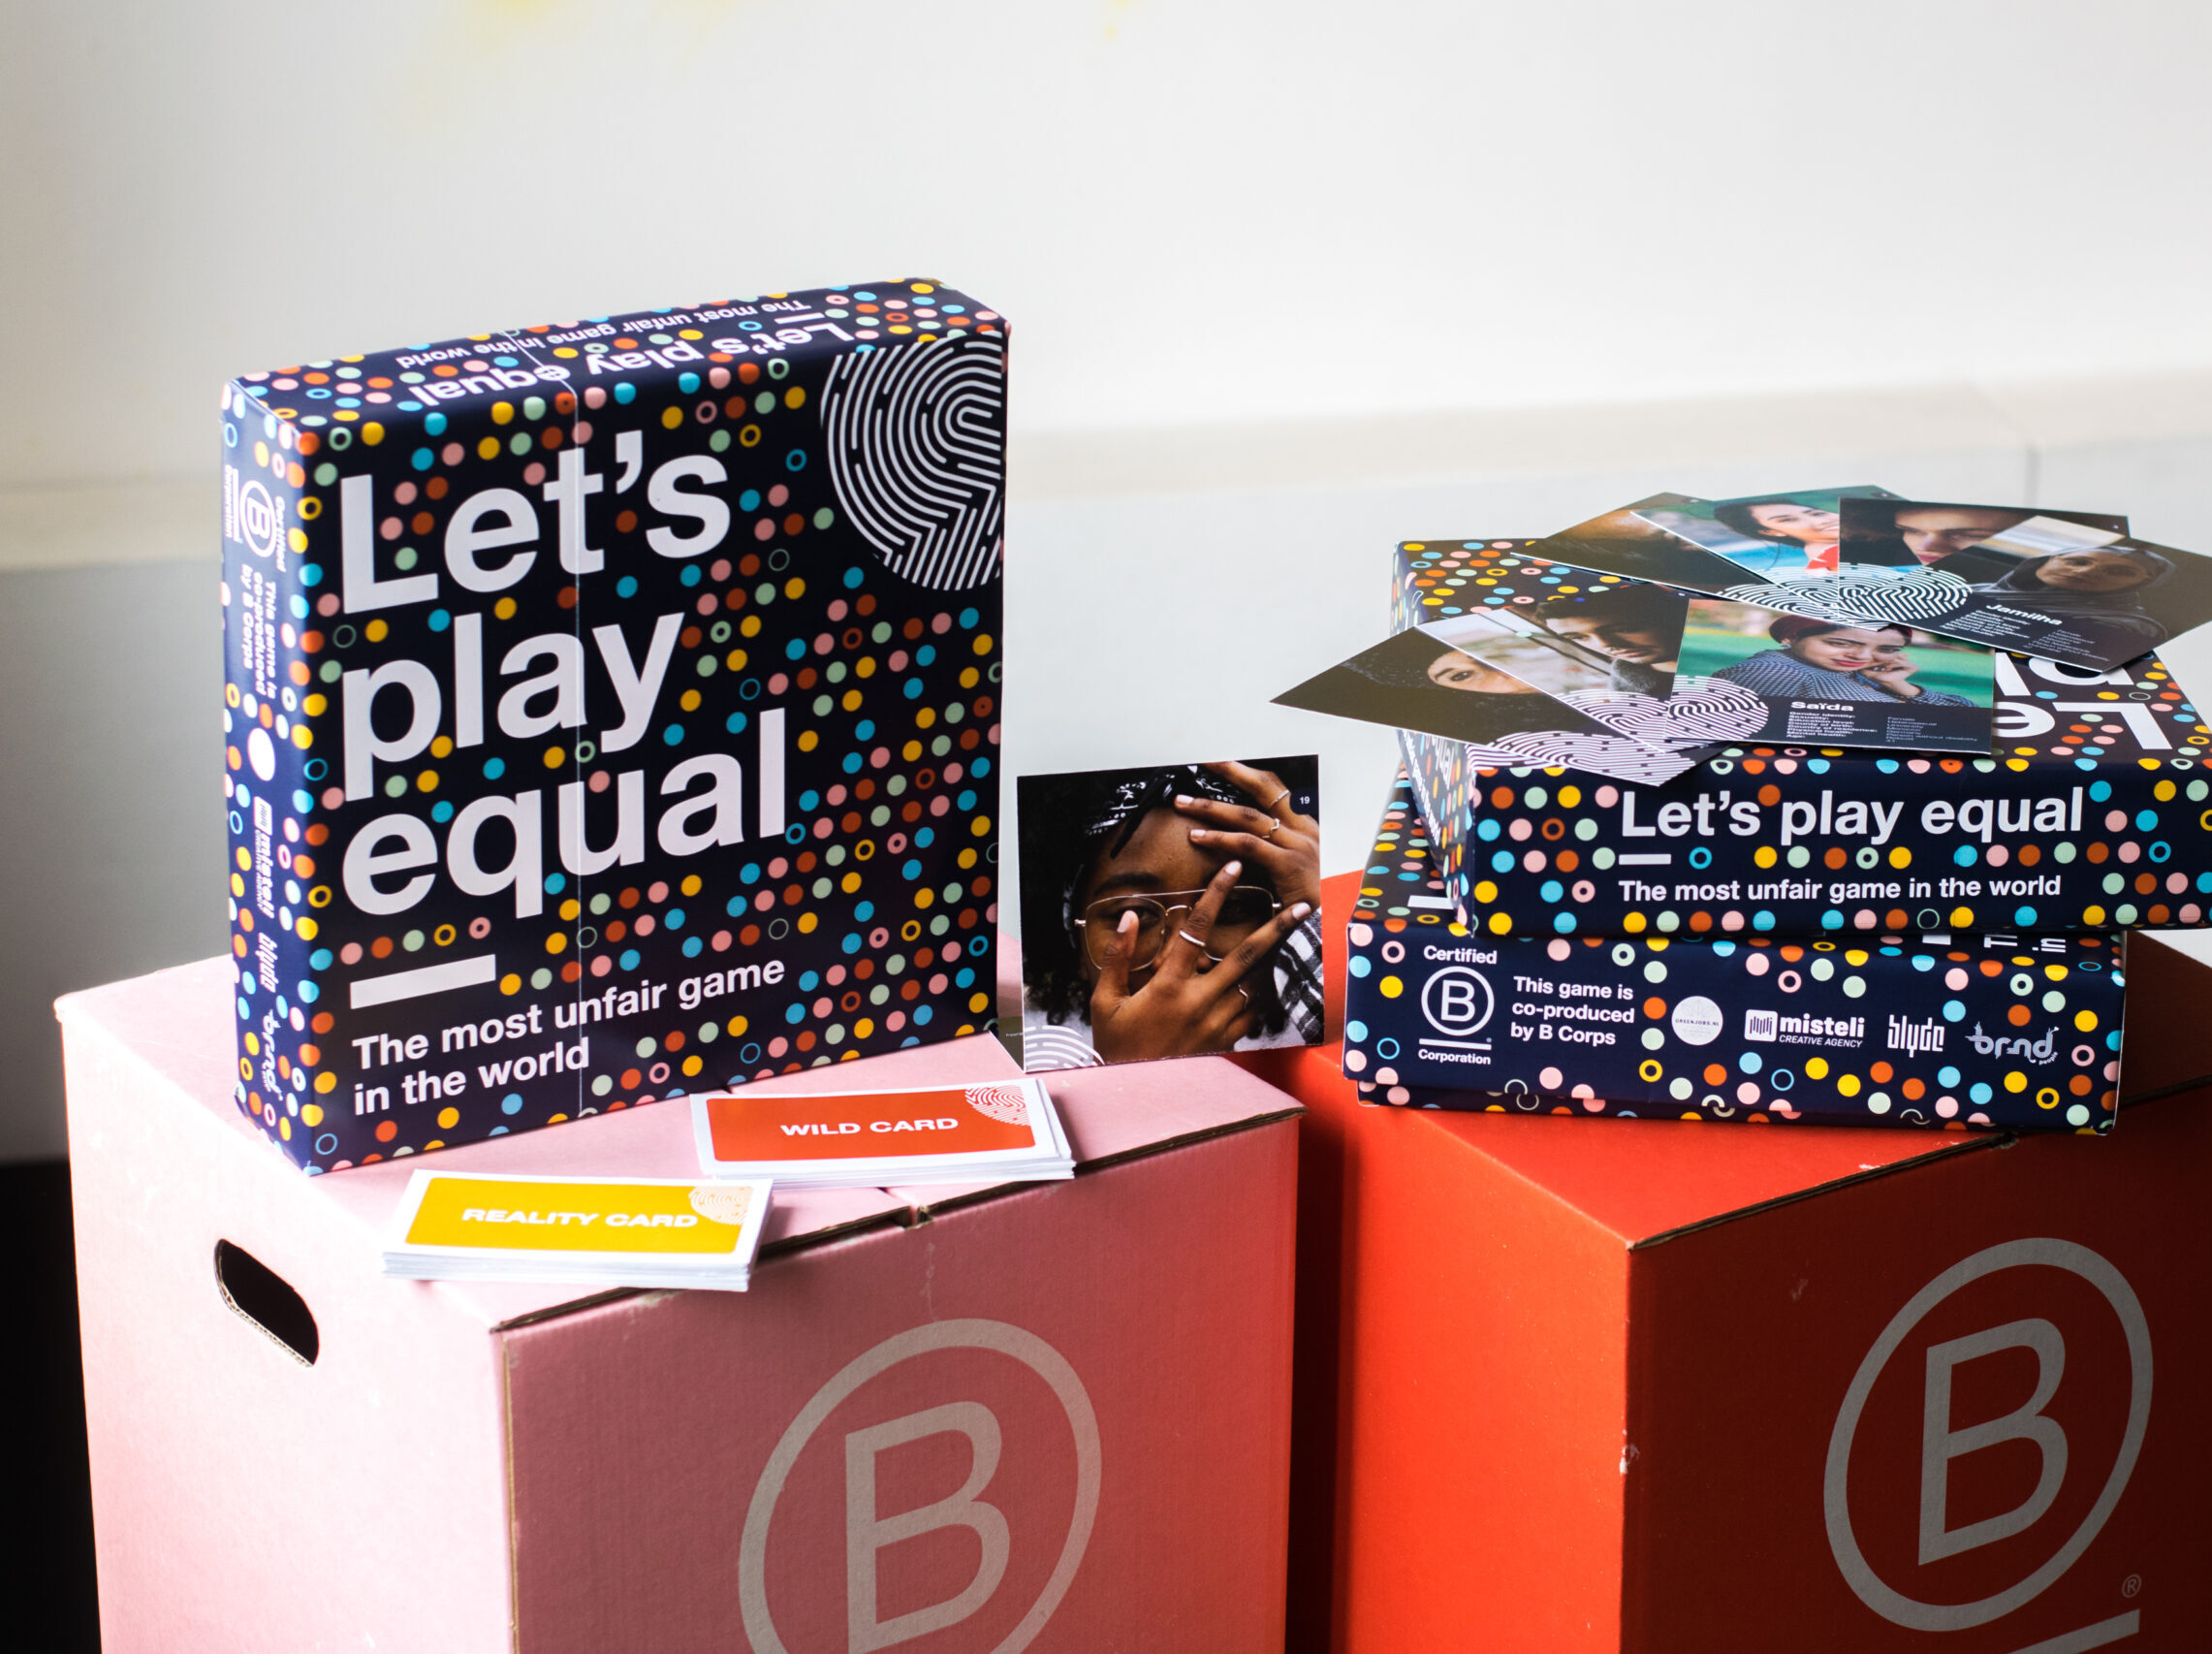 Let’s play equal – a board game co-produced by four B Corps